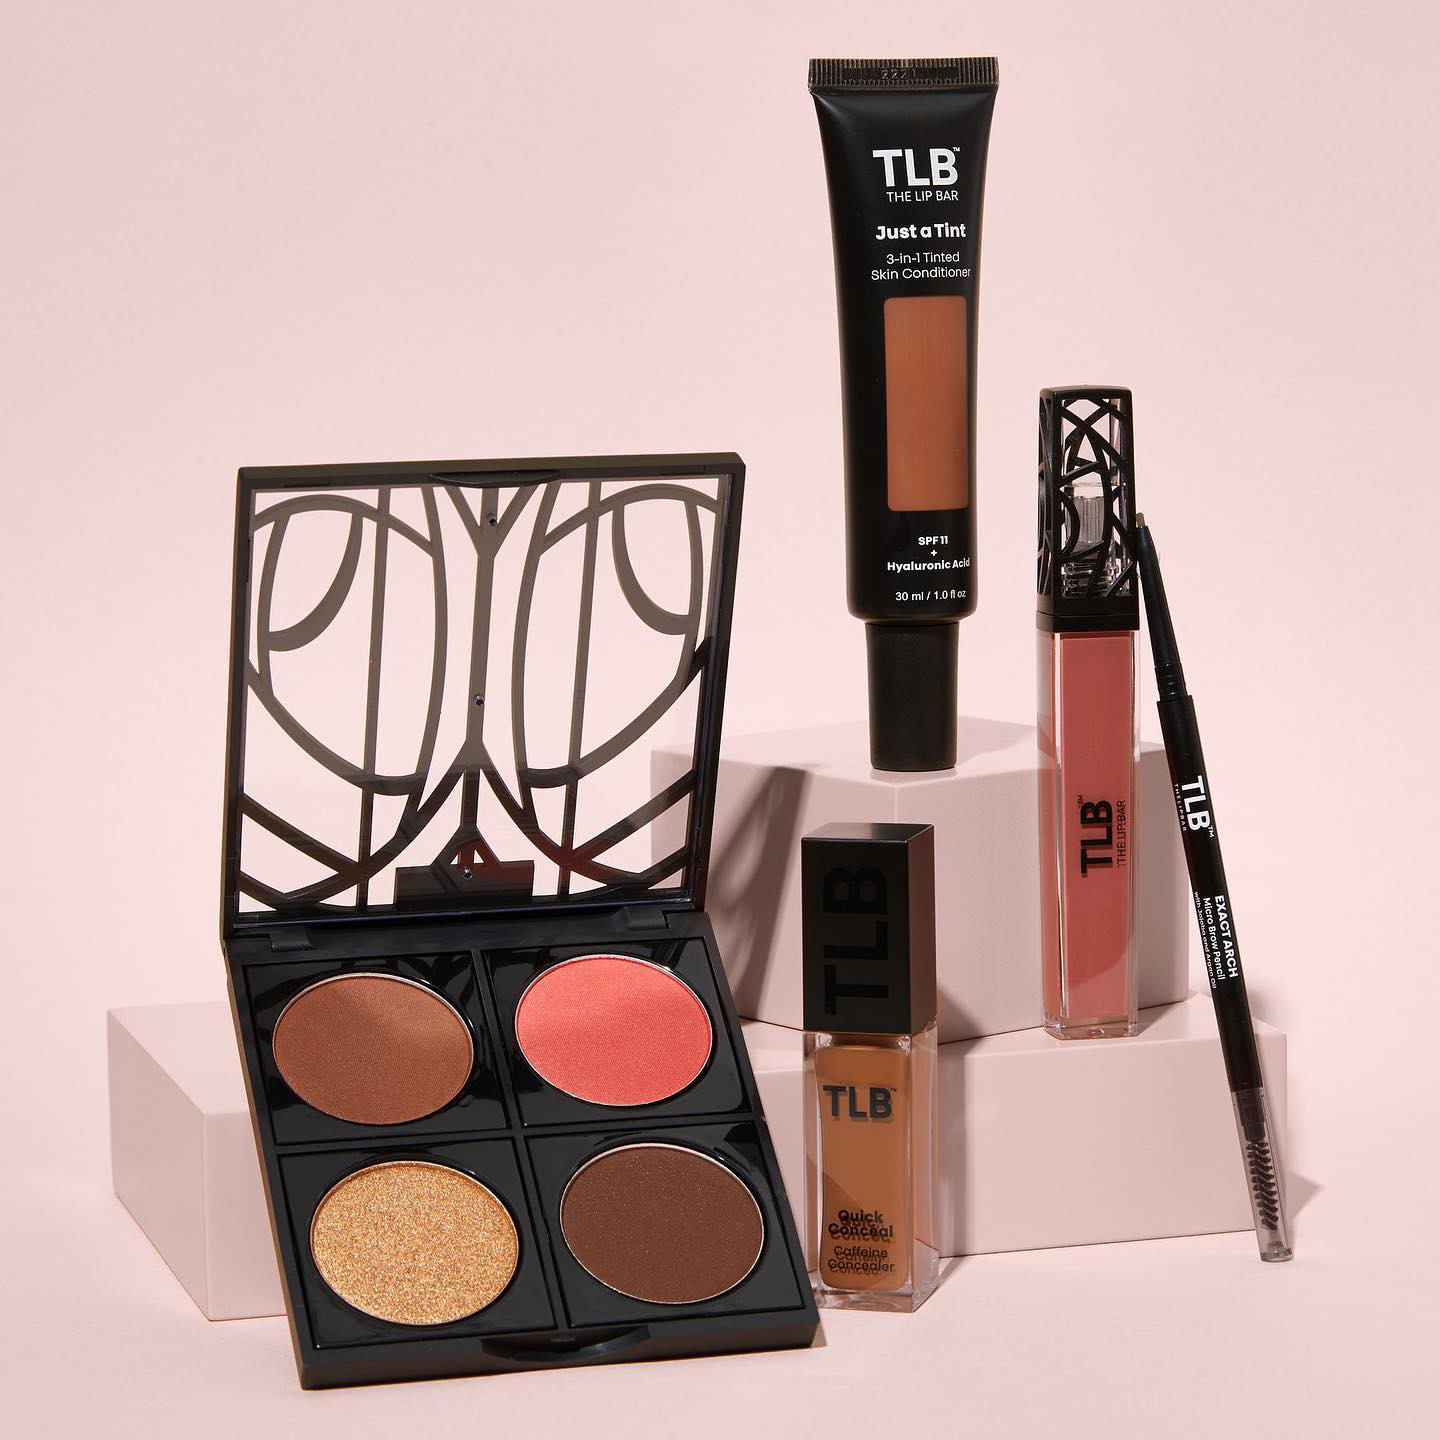 The Lip Bar products